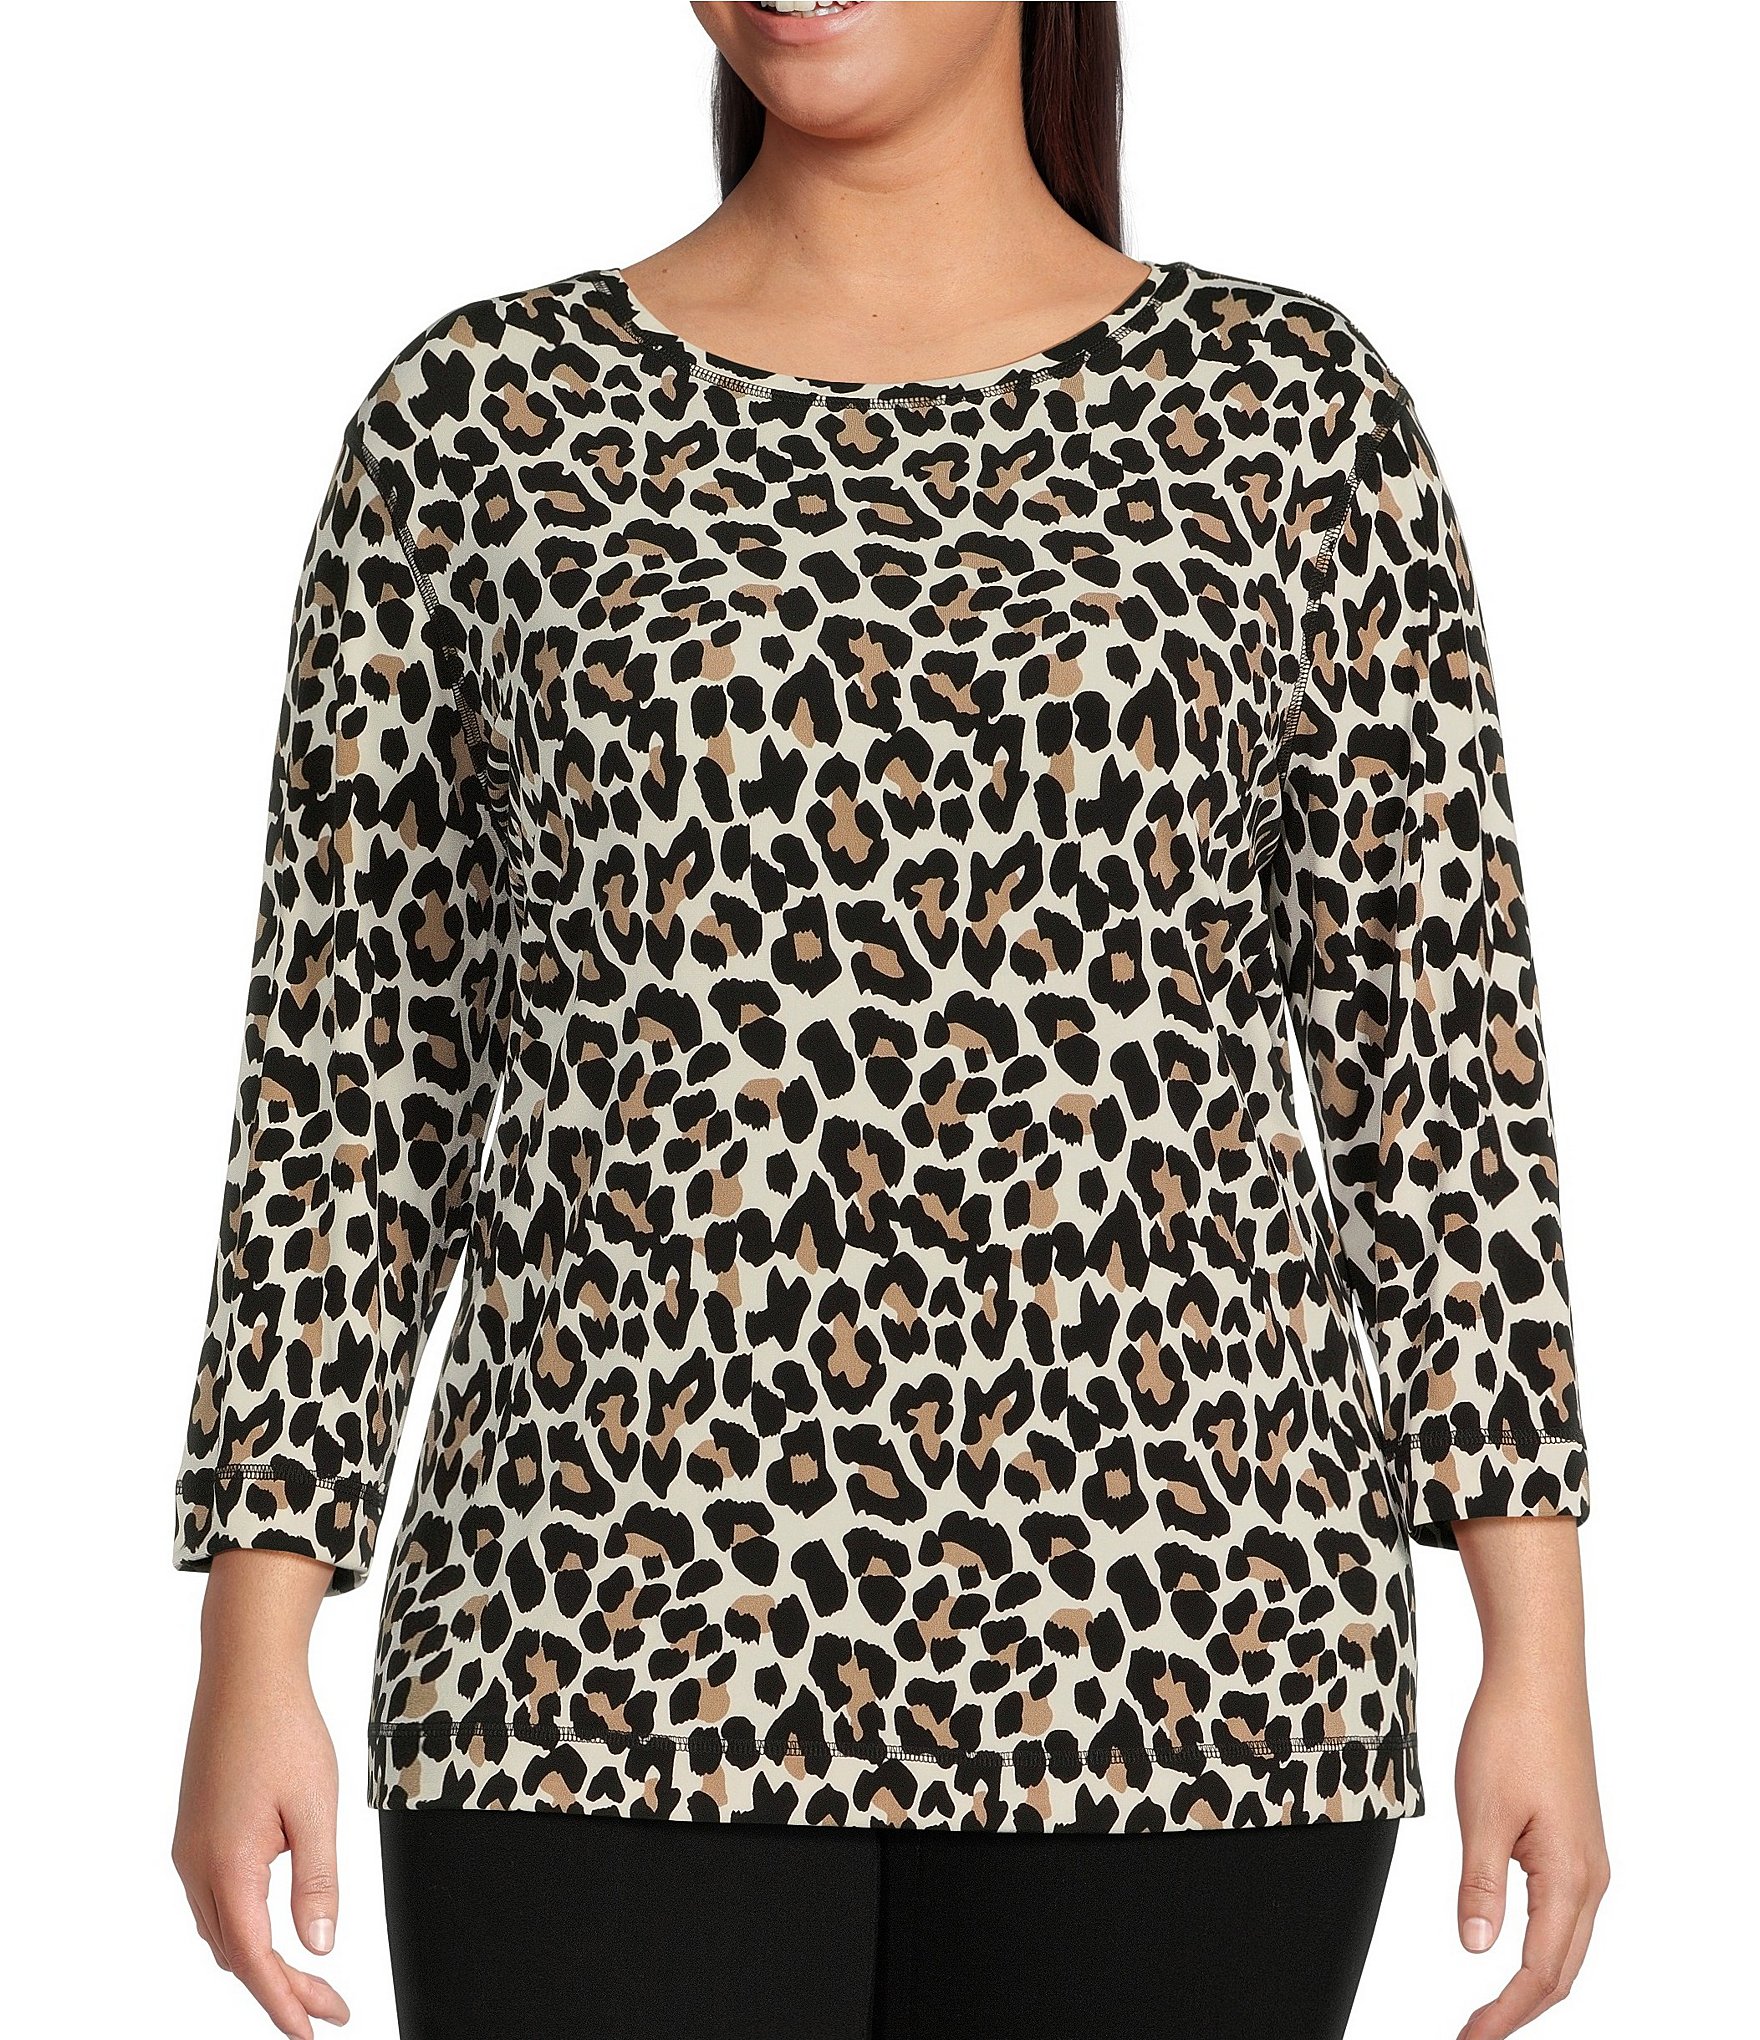 Women Plus Size Graphic Letter and Leopard Print Round Neck Long-sleeve Tee